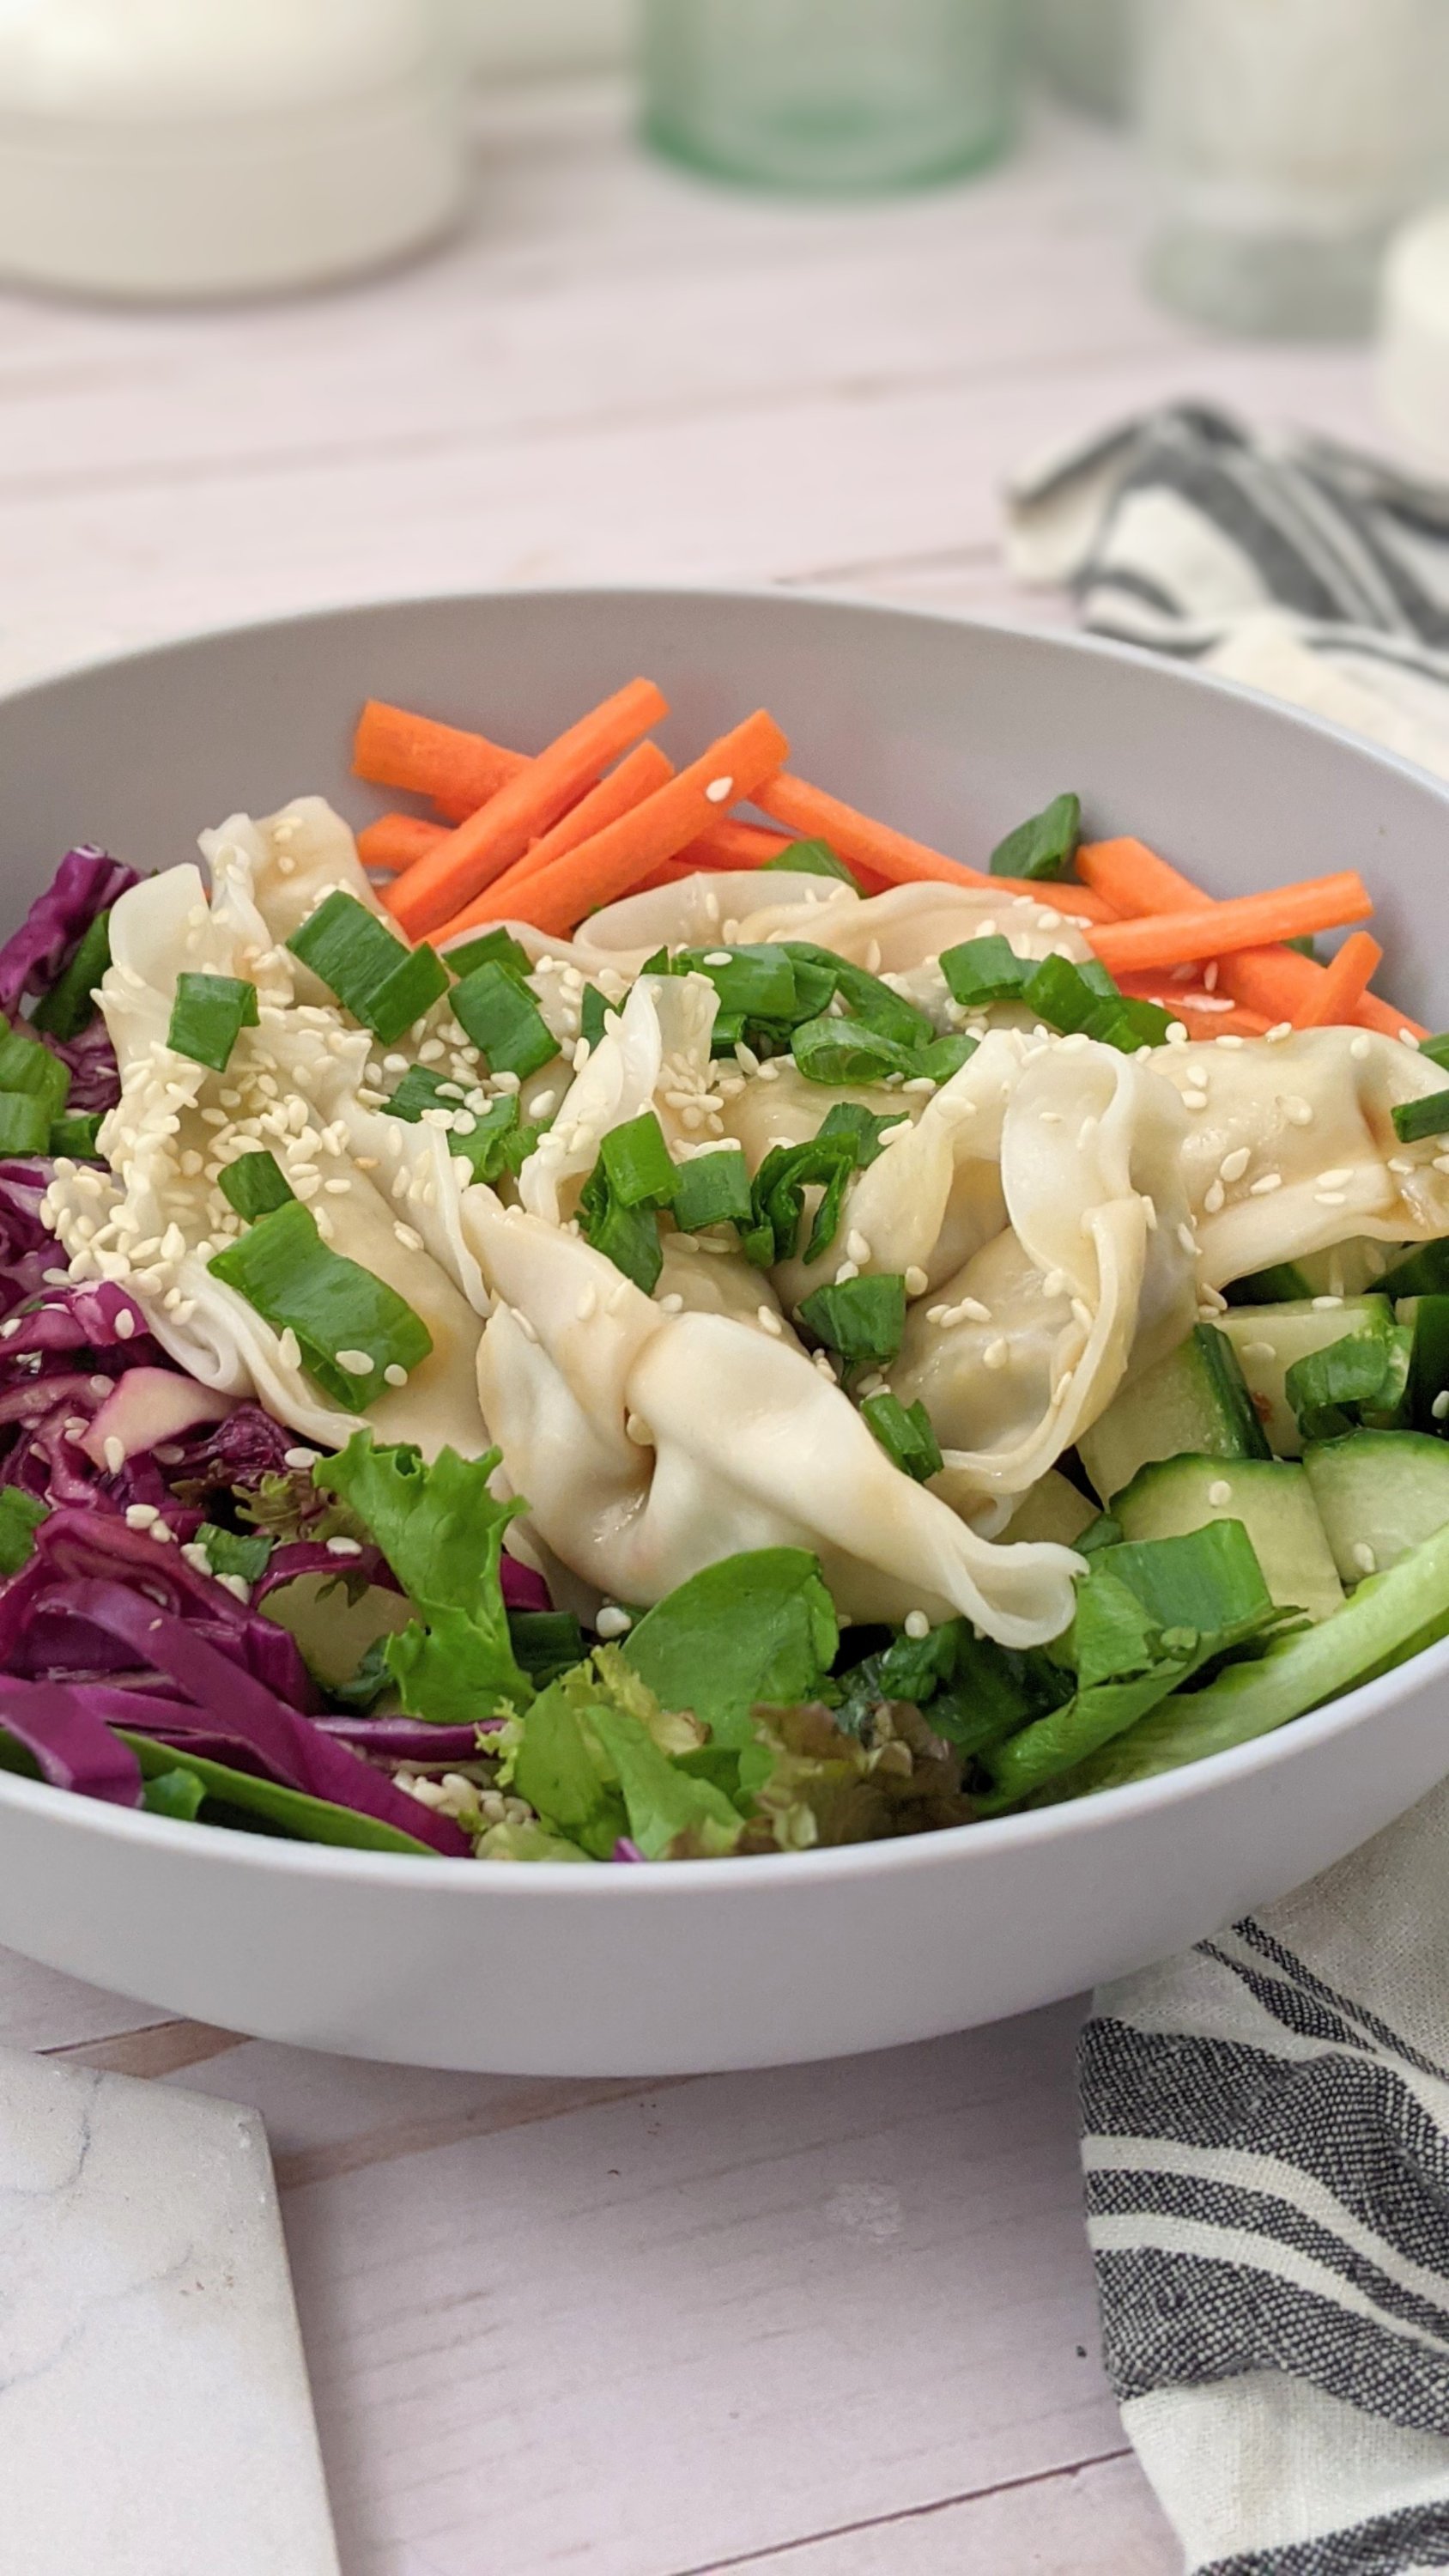 plant based dumpling salad recipe salads with pot stickers how to eat leftover pot stickers in a salad vegan gluten free filling lunch ideas for work or school